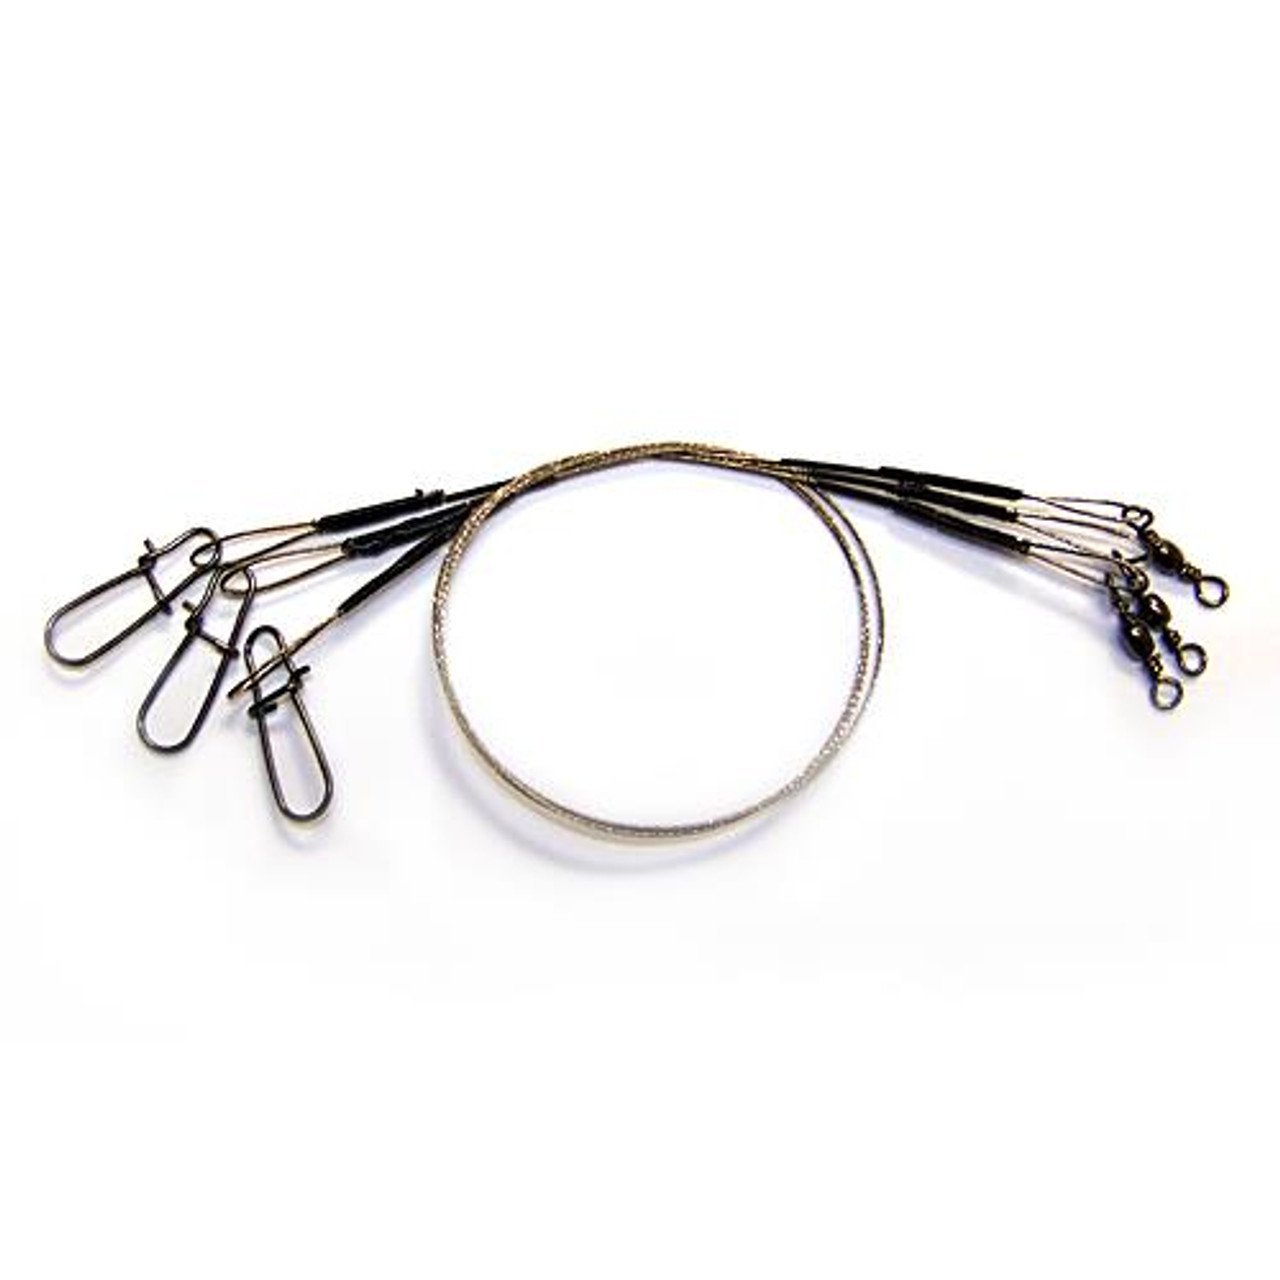 Eagle Claw Black Heavy Duty 18 Wire Leaders 3-Pack